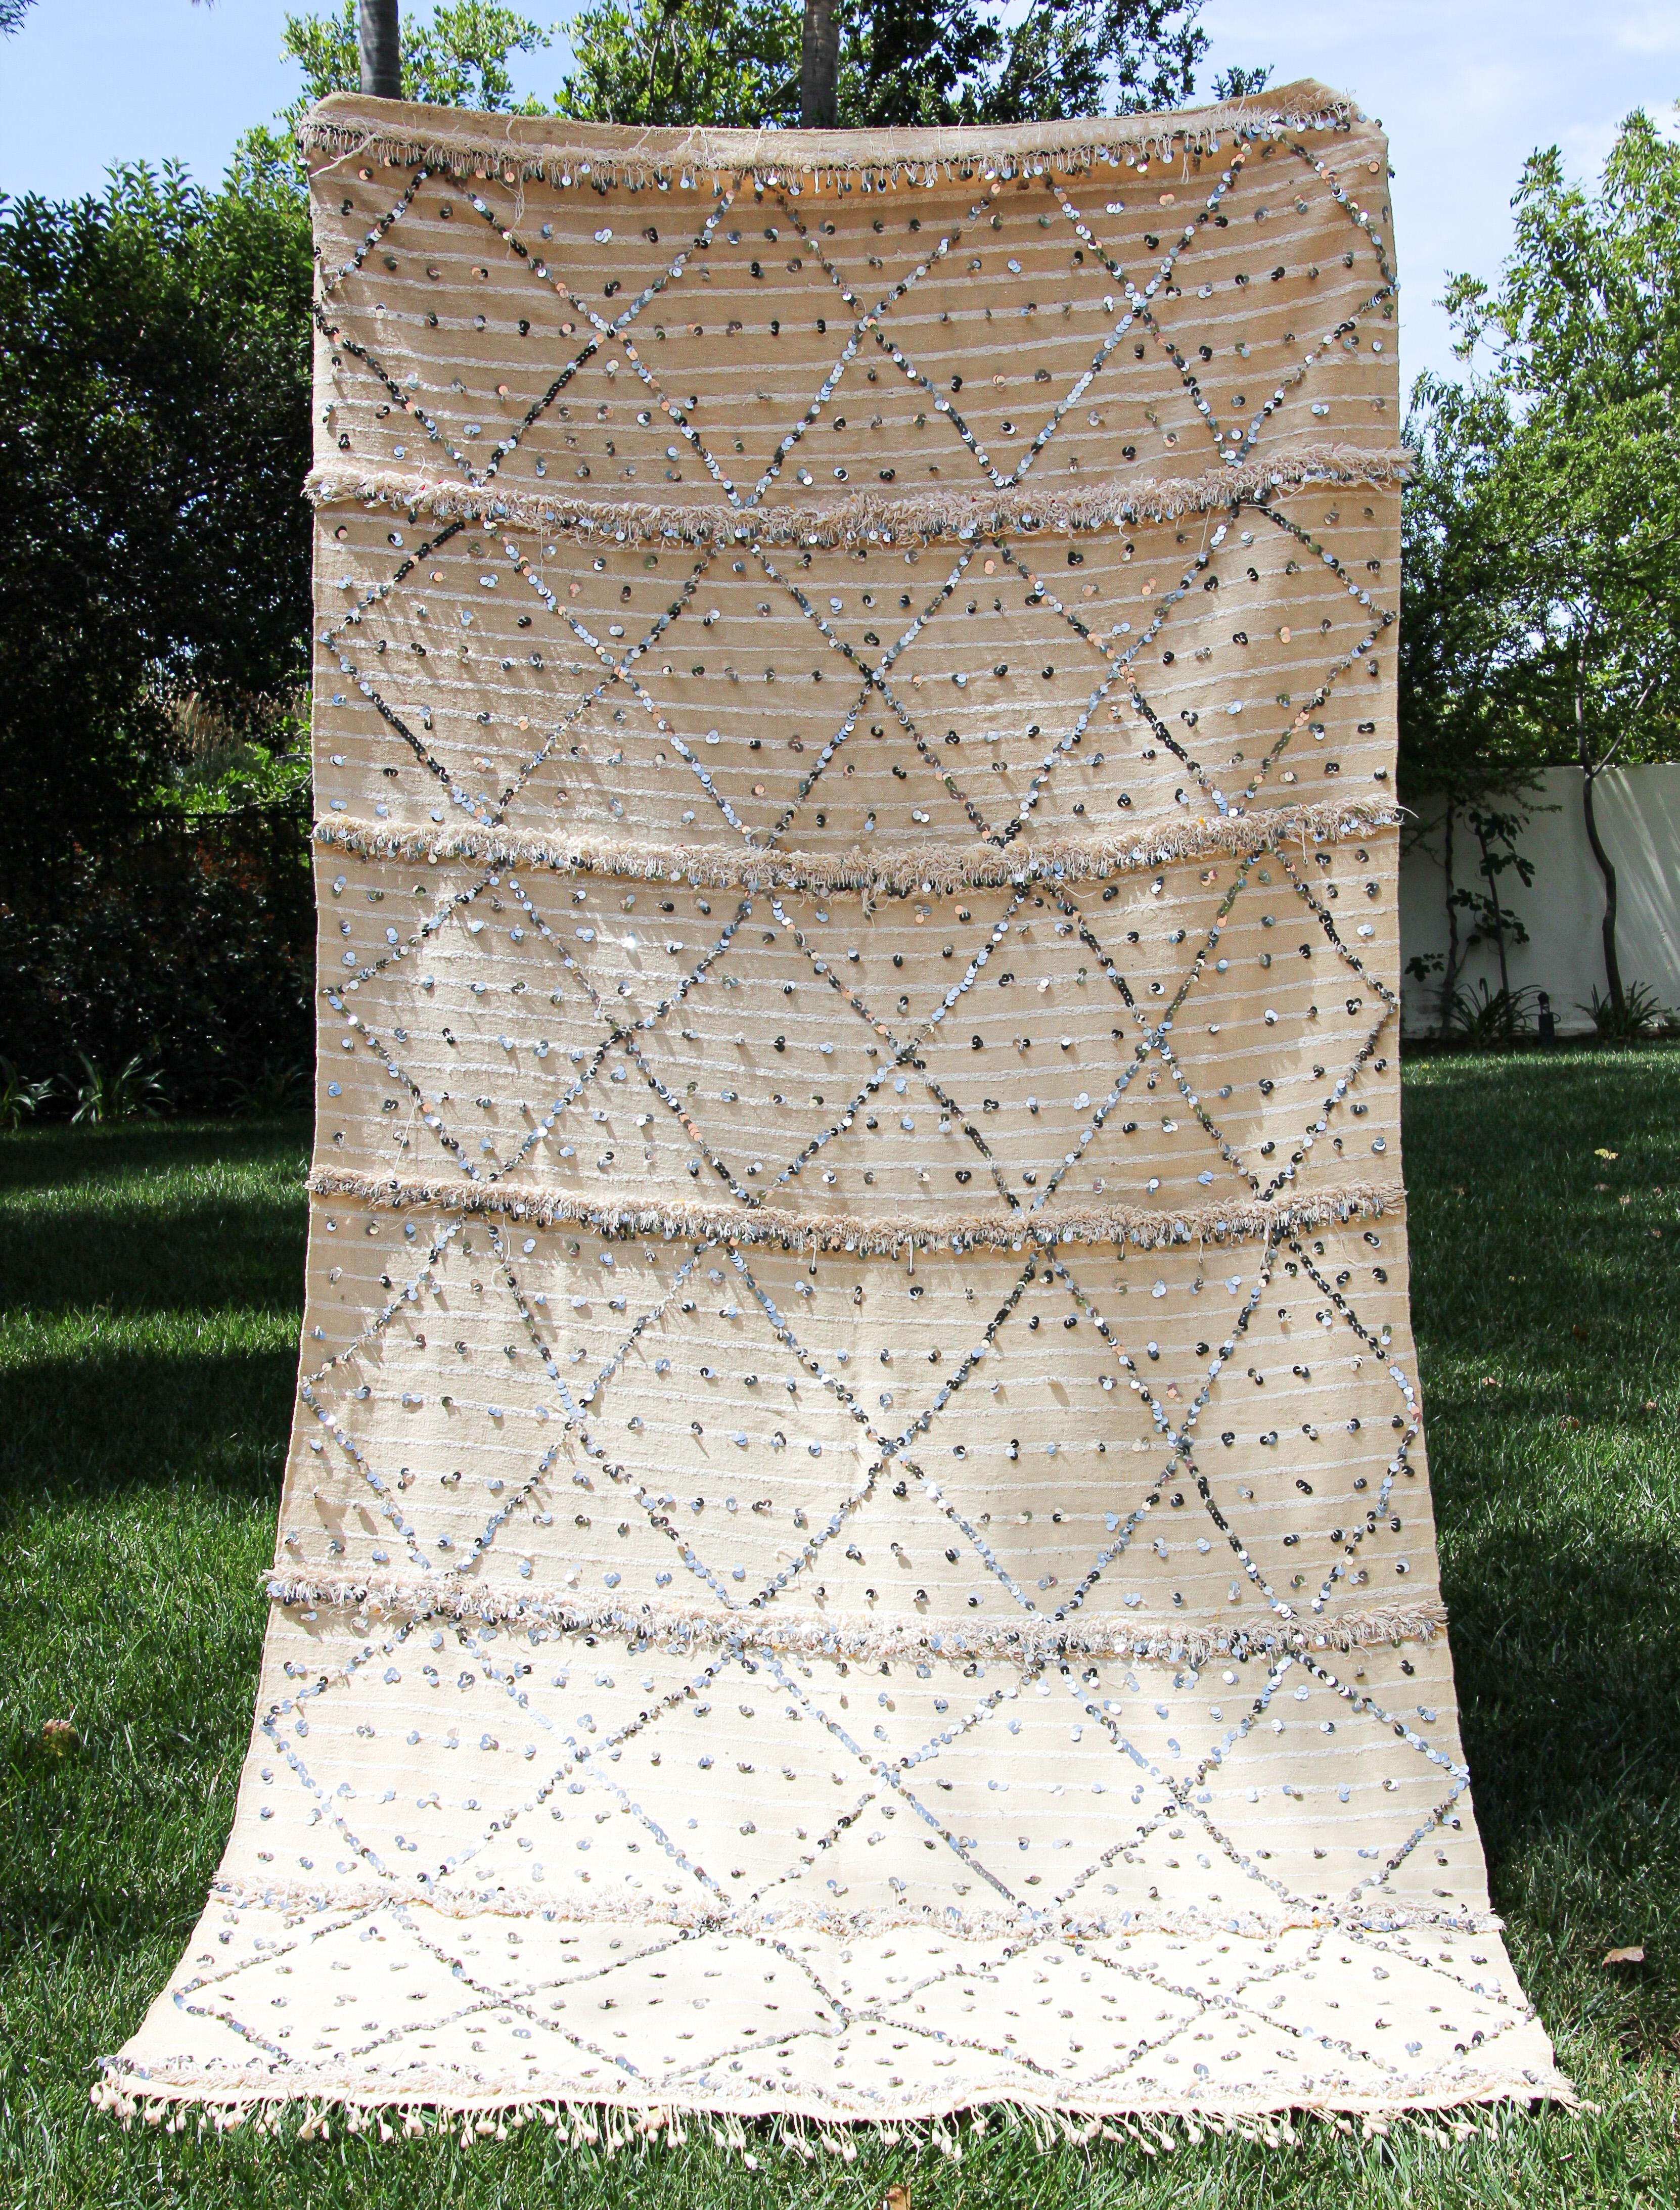 Very large vintage authentic tribal Moroccan wedding Berber women shawl, blanket, throw.The Zaiane tribal shawls incorporate quantities of sequins in their design to achieve an impressive decorative effect on the alternate stripes of wo and cotton